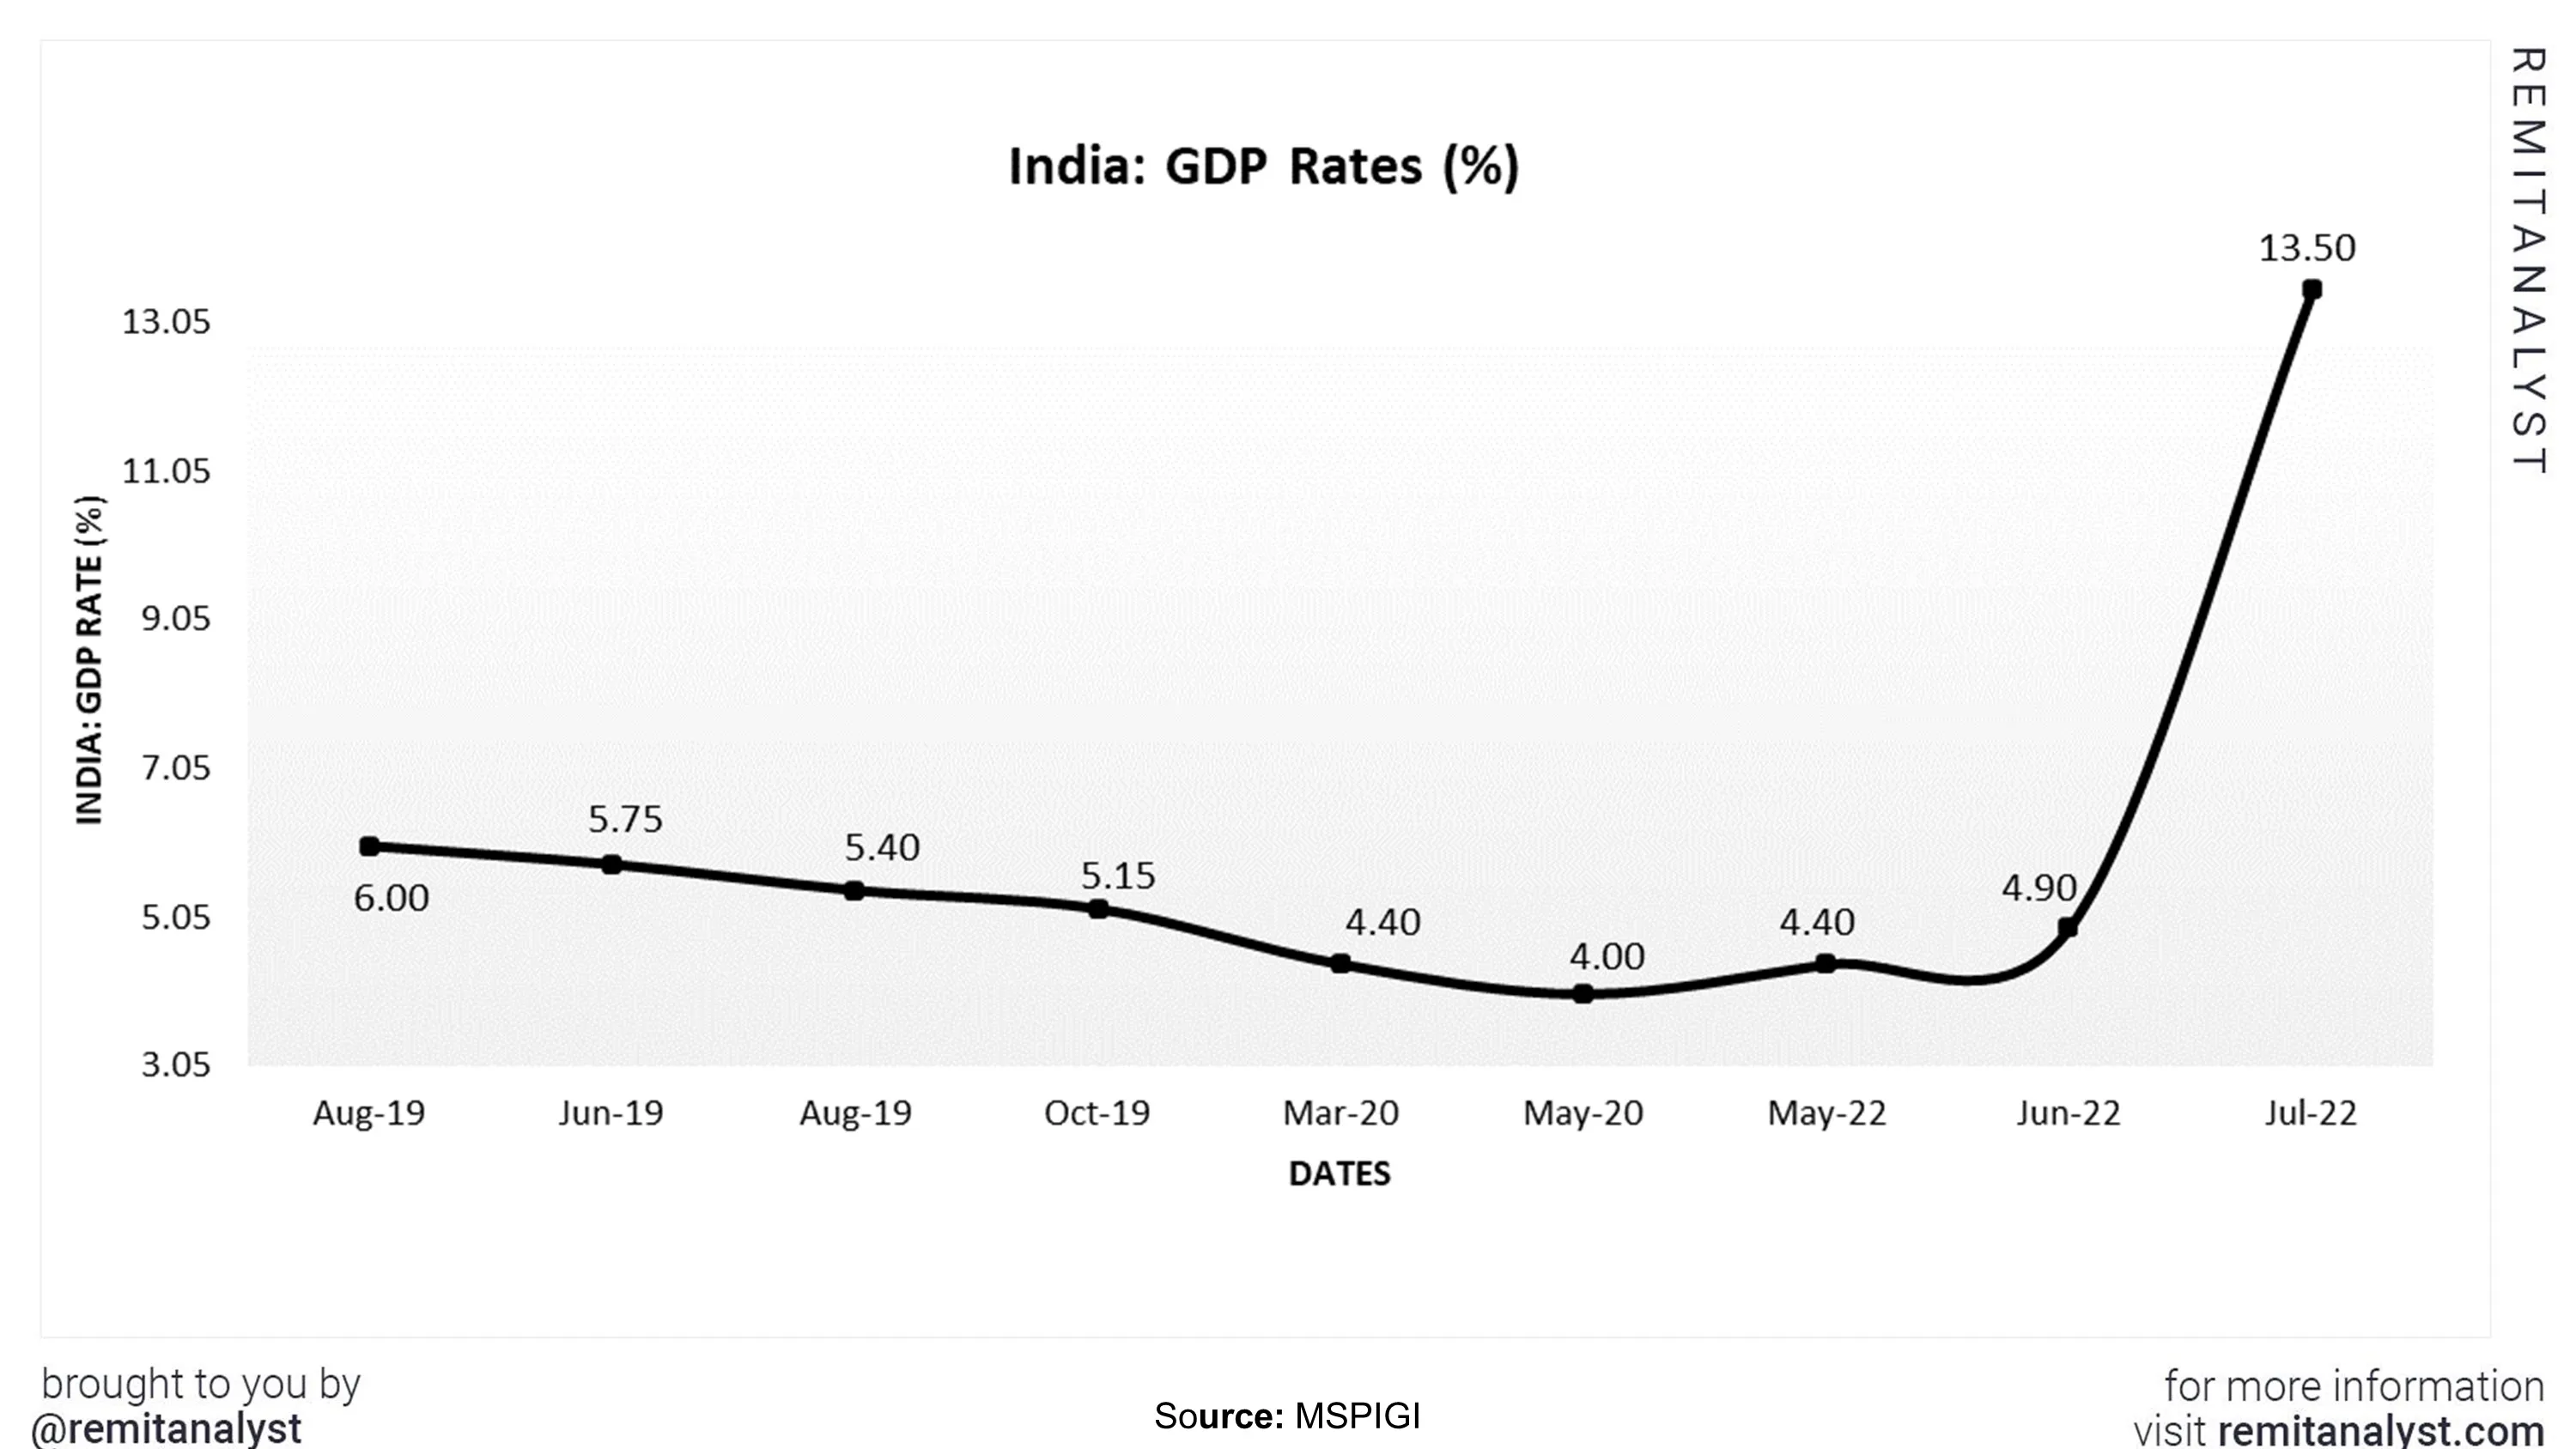 india-gdp-rate-from-aug-2019-to-jul-2022